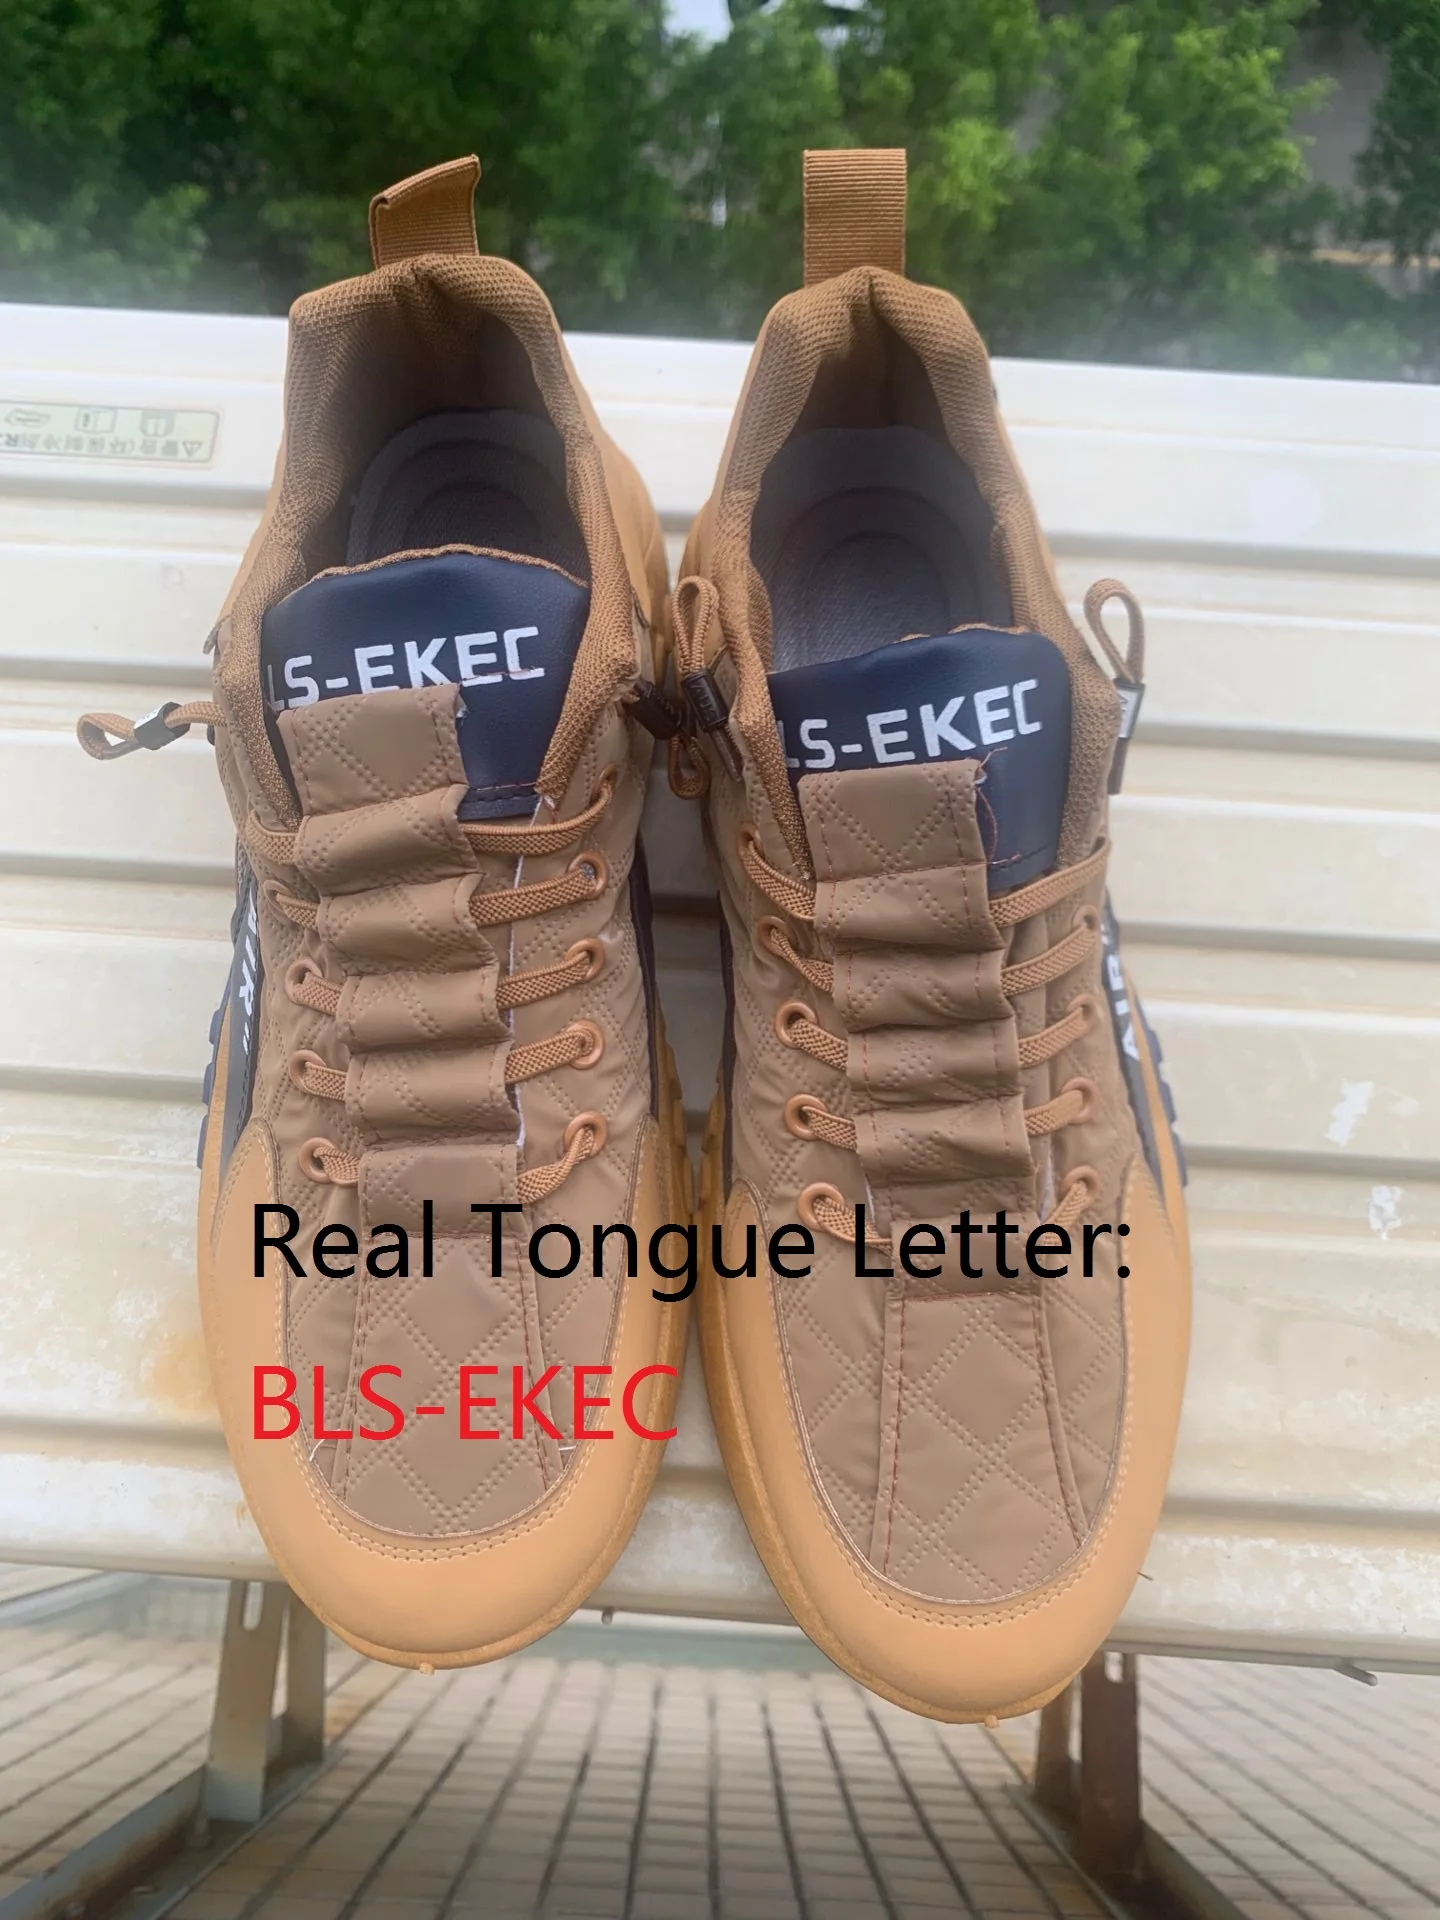 Share 191+ bls shoes latest